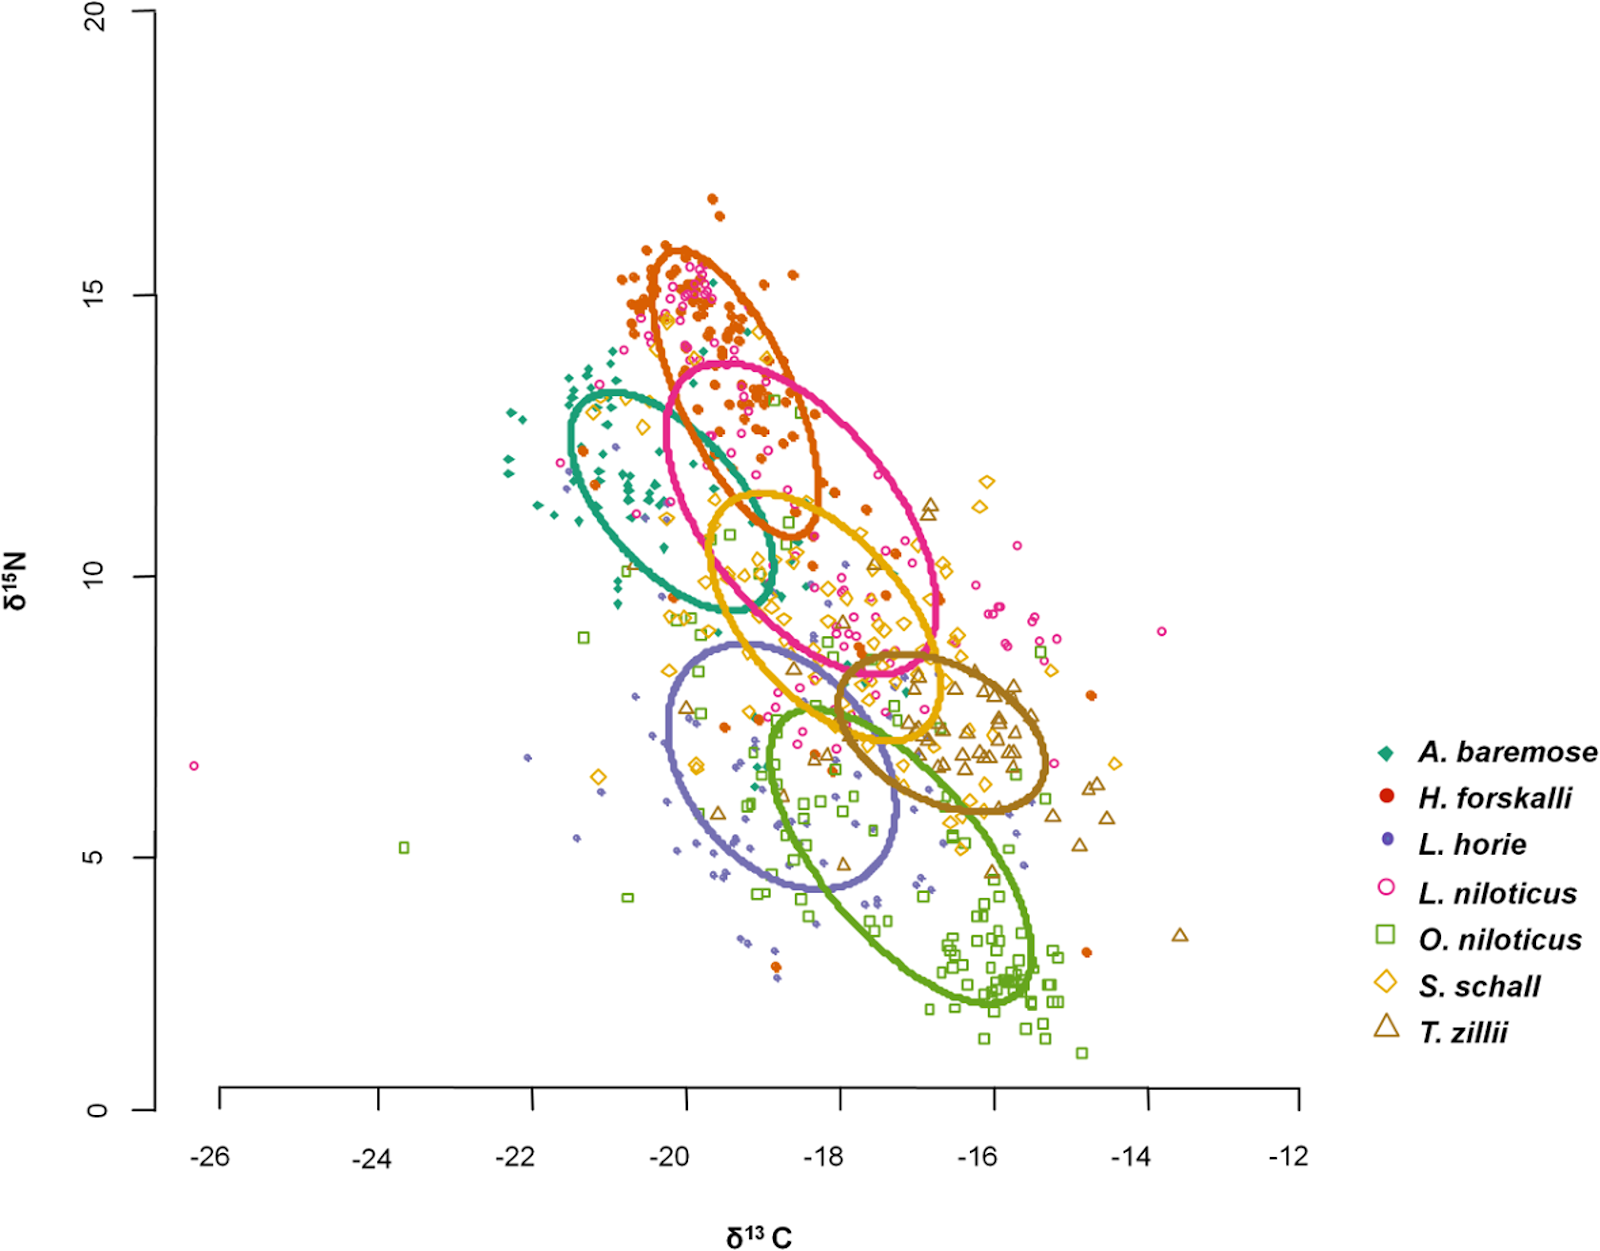 A scatter plot with concentration of carbon thirteen ranging from negative twenty-six to negative twelve on the x-axis and concentration of nitrogen fifteen ranging from zero to twenty on the y-axis. Species H. forskalli and A. baremose are closest to the top left, with S. schall , and L. niloticus in the middle, L. horie on the bottom middle, and O. niloticus abd T. zillii on the bottom right.